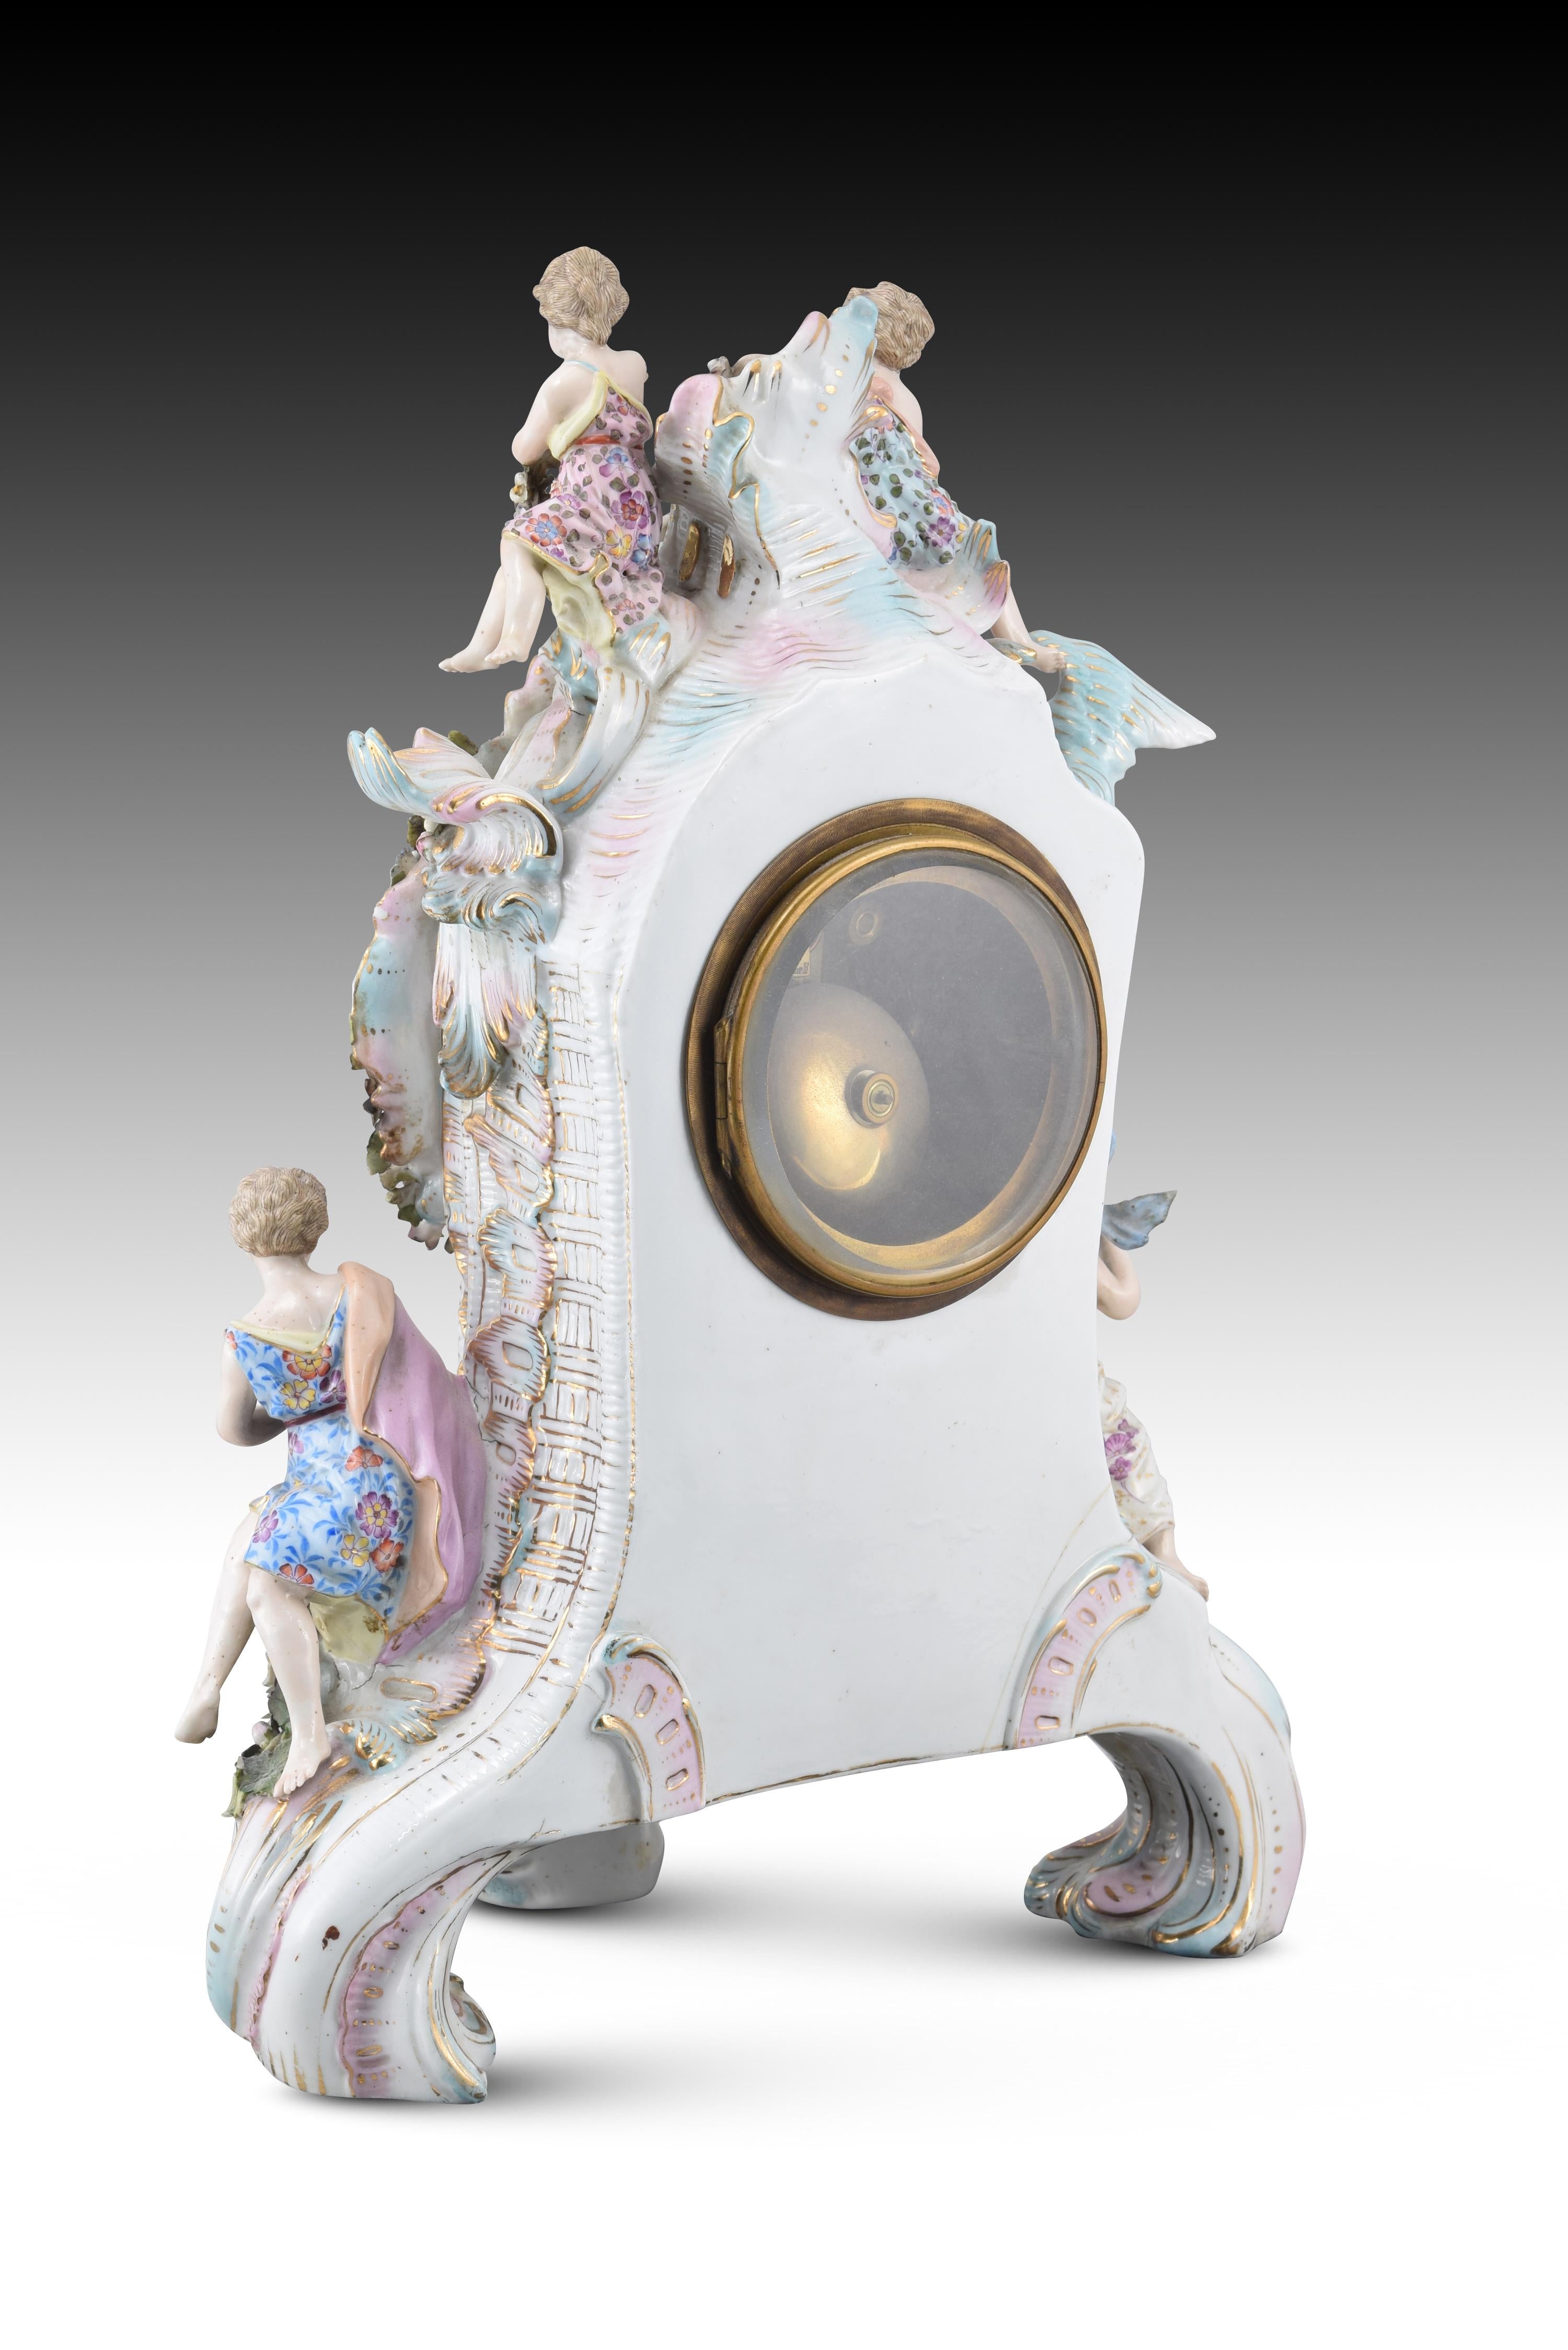 Neoclassical Revival Clock. Porcelain, metal, glass. Lenzkirch, Germany, late 19th century. 